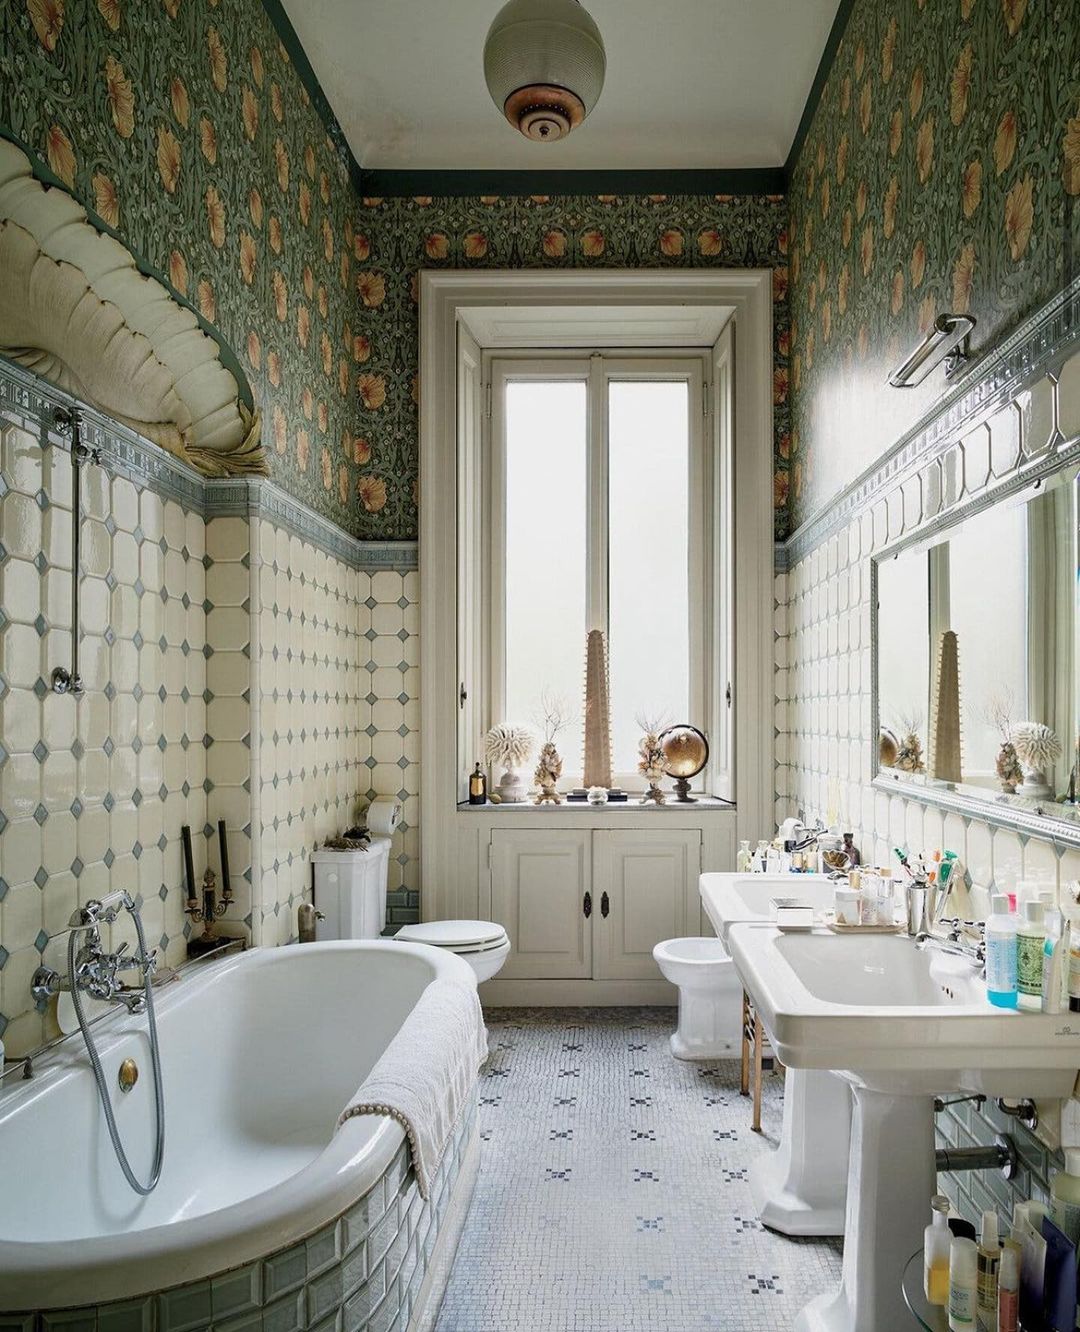 Antique Tiles Adding Timeless Elegance to Your Space